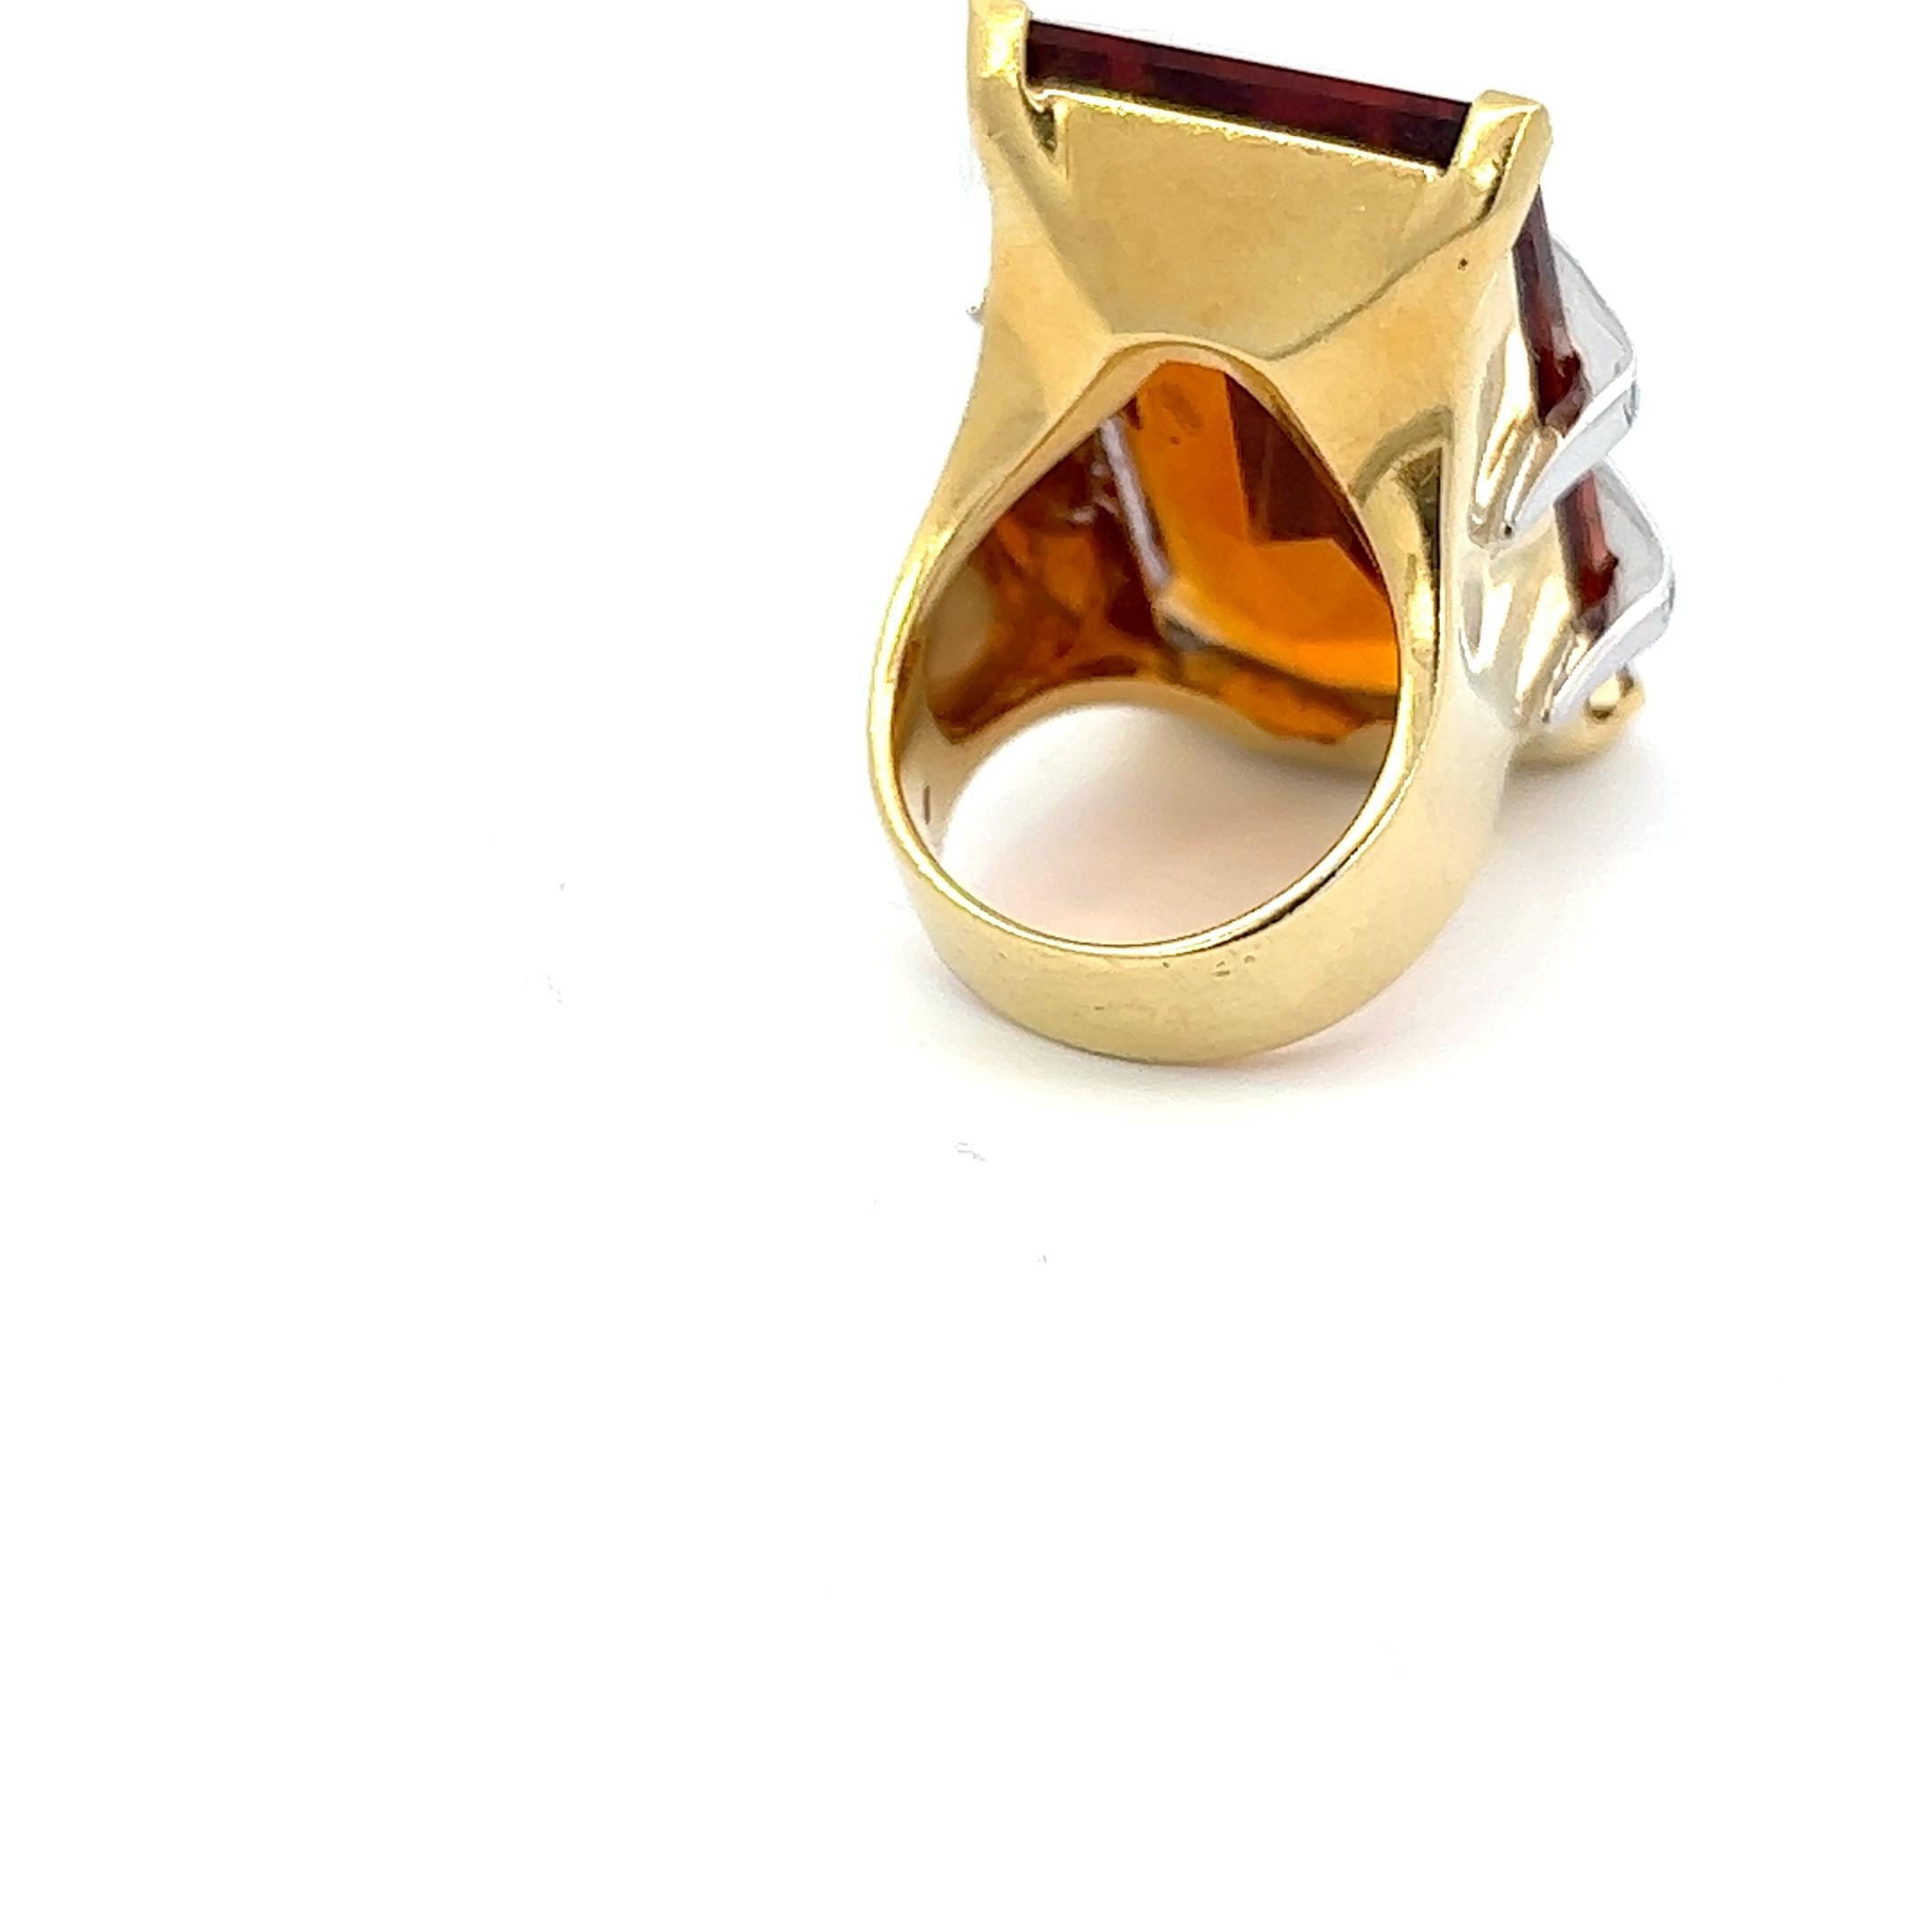 An 18k yellow gold, step-cut Topaz and Diamond ring by Roberto Legnazzi.

Total Diamond weight: circa 0.8ct, graded while in setting.

Origin: Alessandria, Italy.
Age: circa 1970.
Ring size: 57.
Weight: circa 37.2 grams.
Marked with the Italian